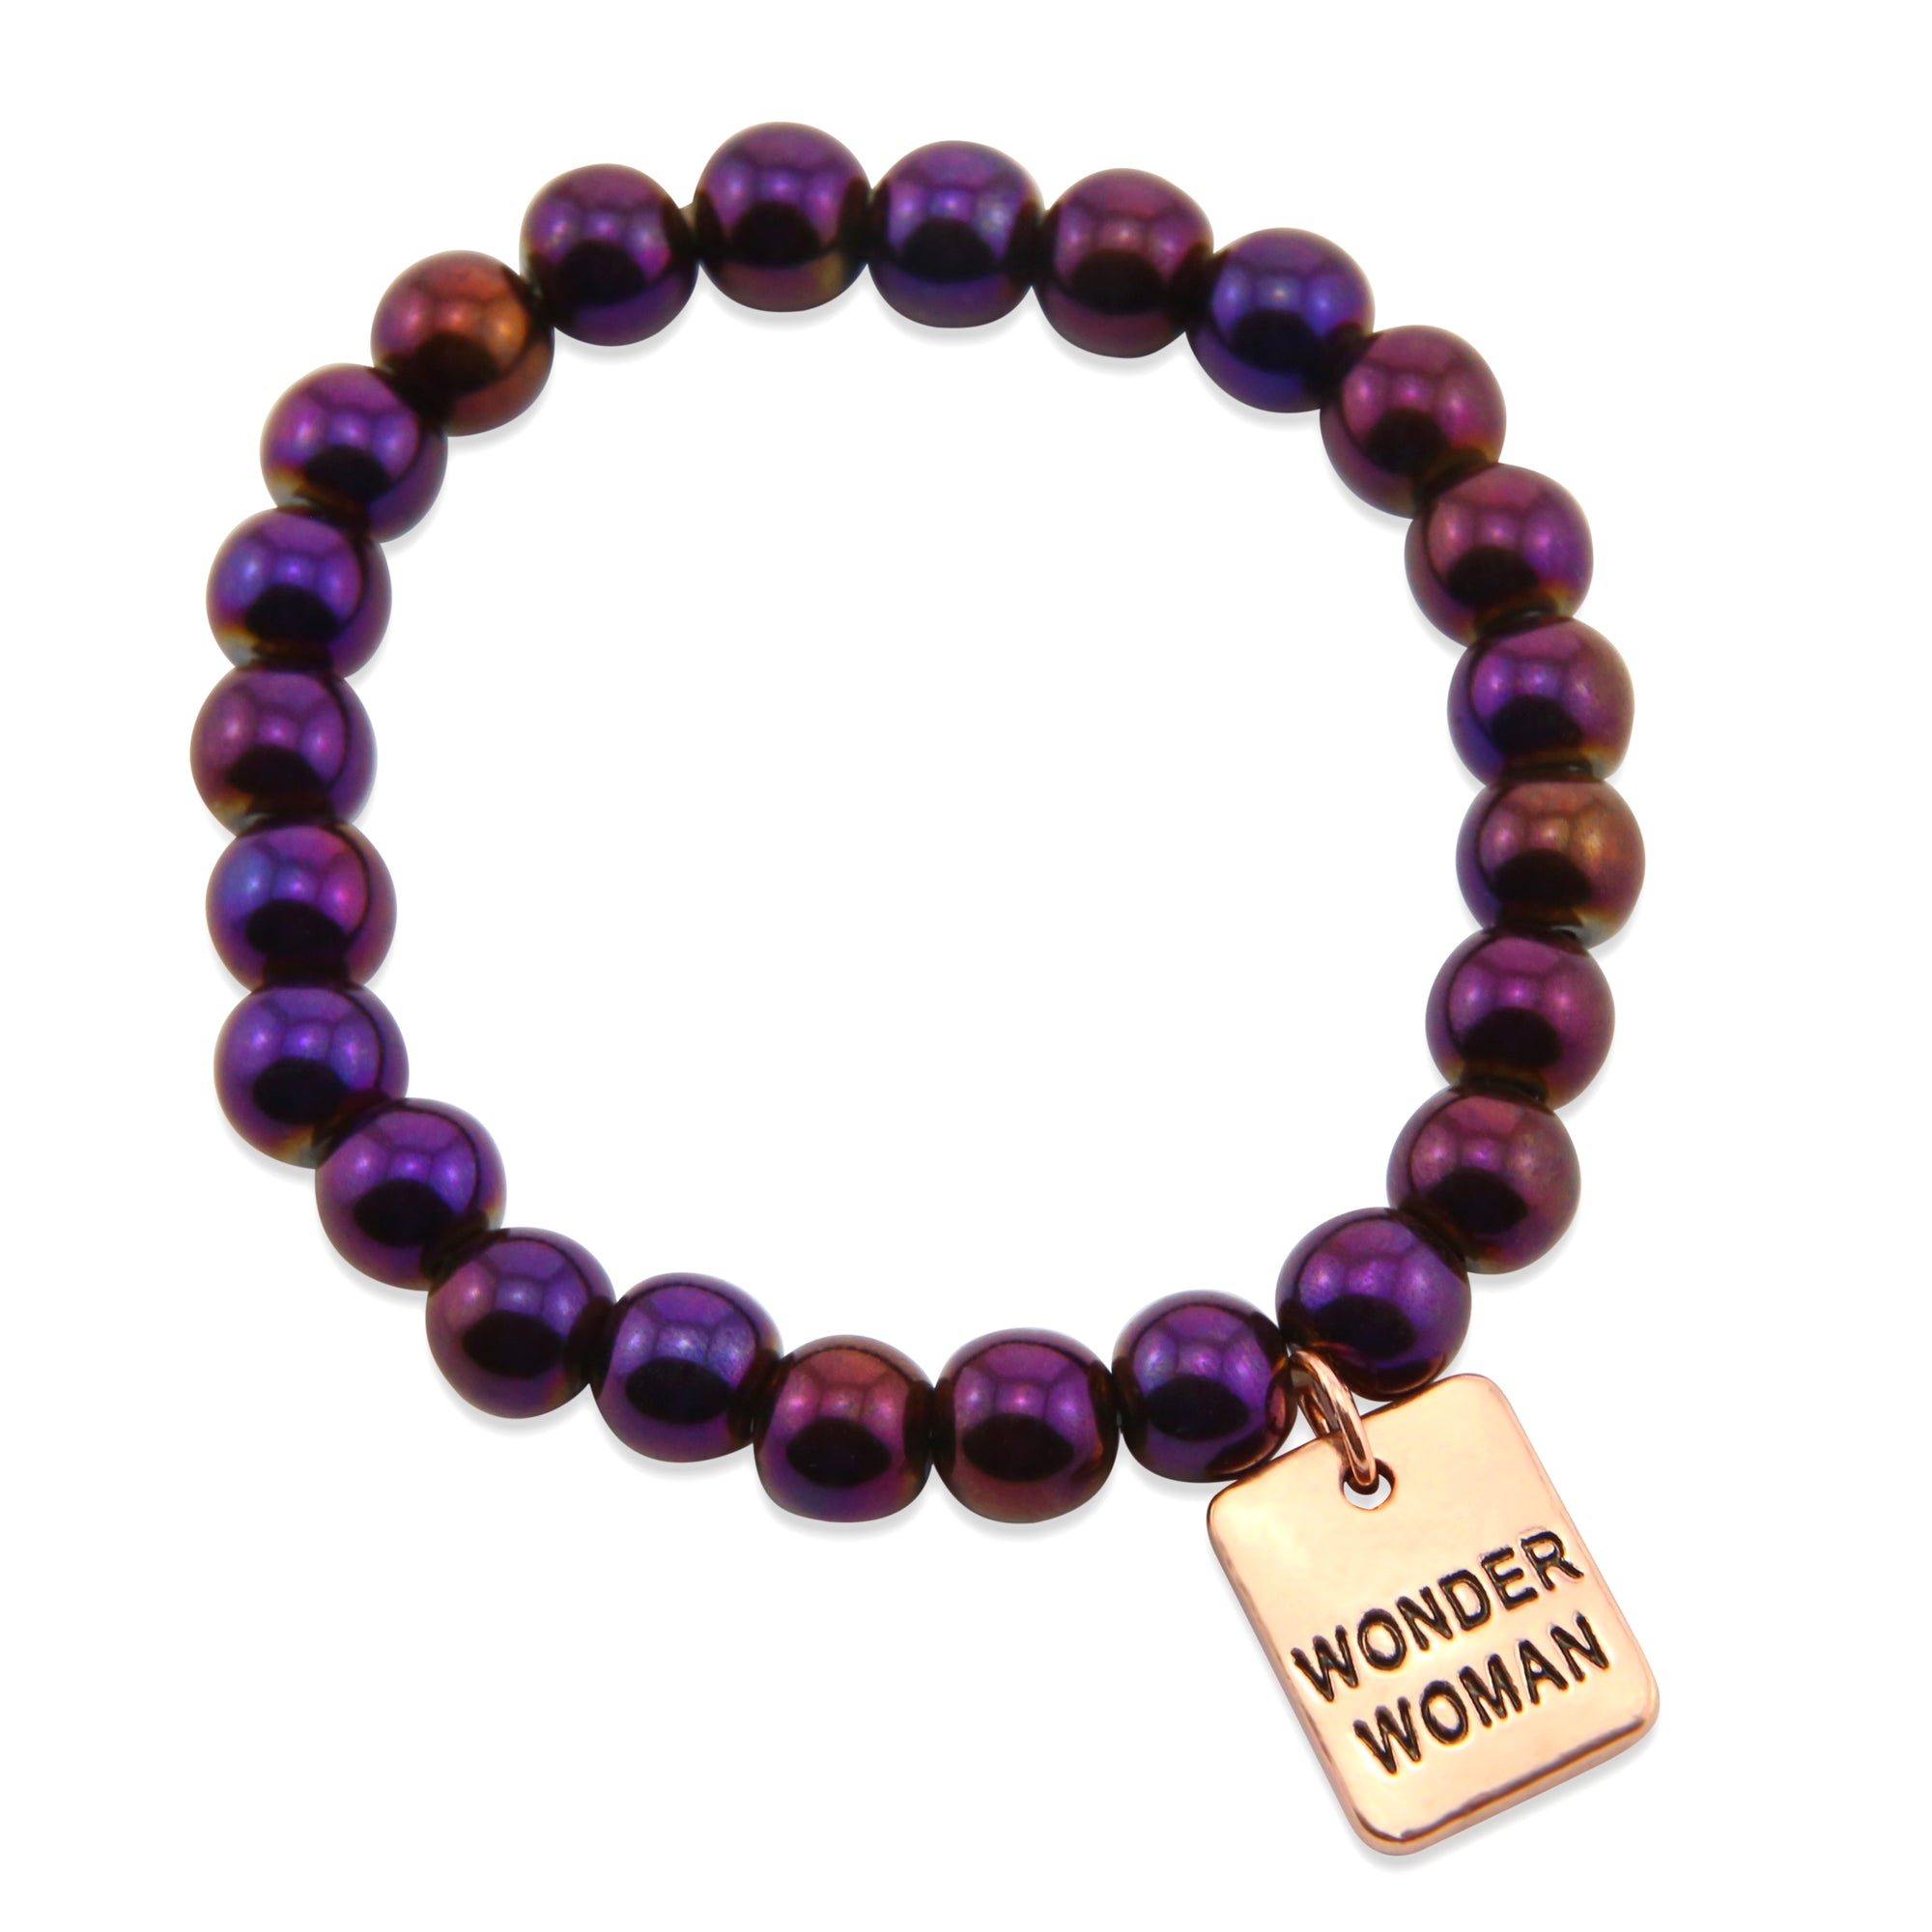 The STRONG WOMEN Collection Hematite Bracelet 8mm Beads with word charm - Purple Powerhouse